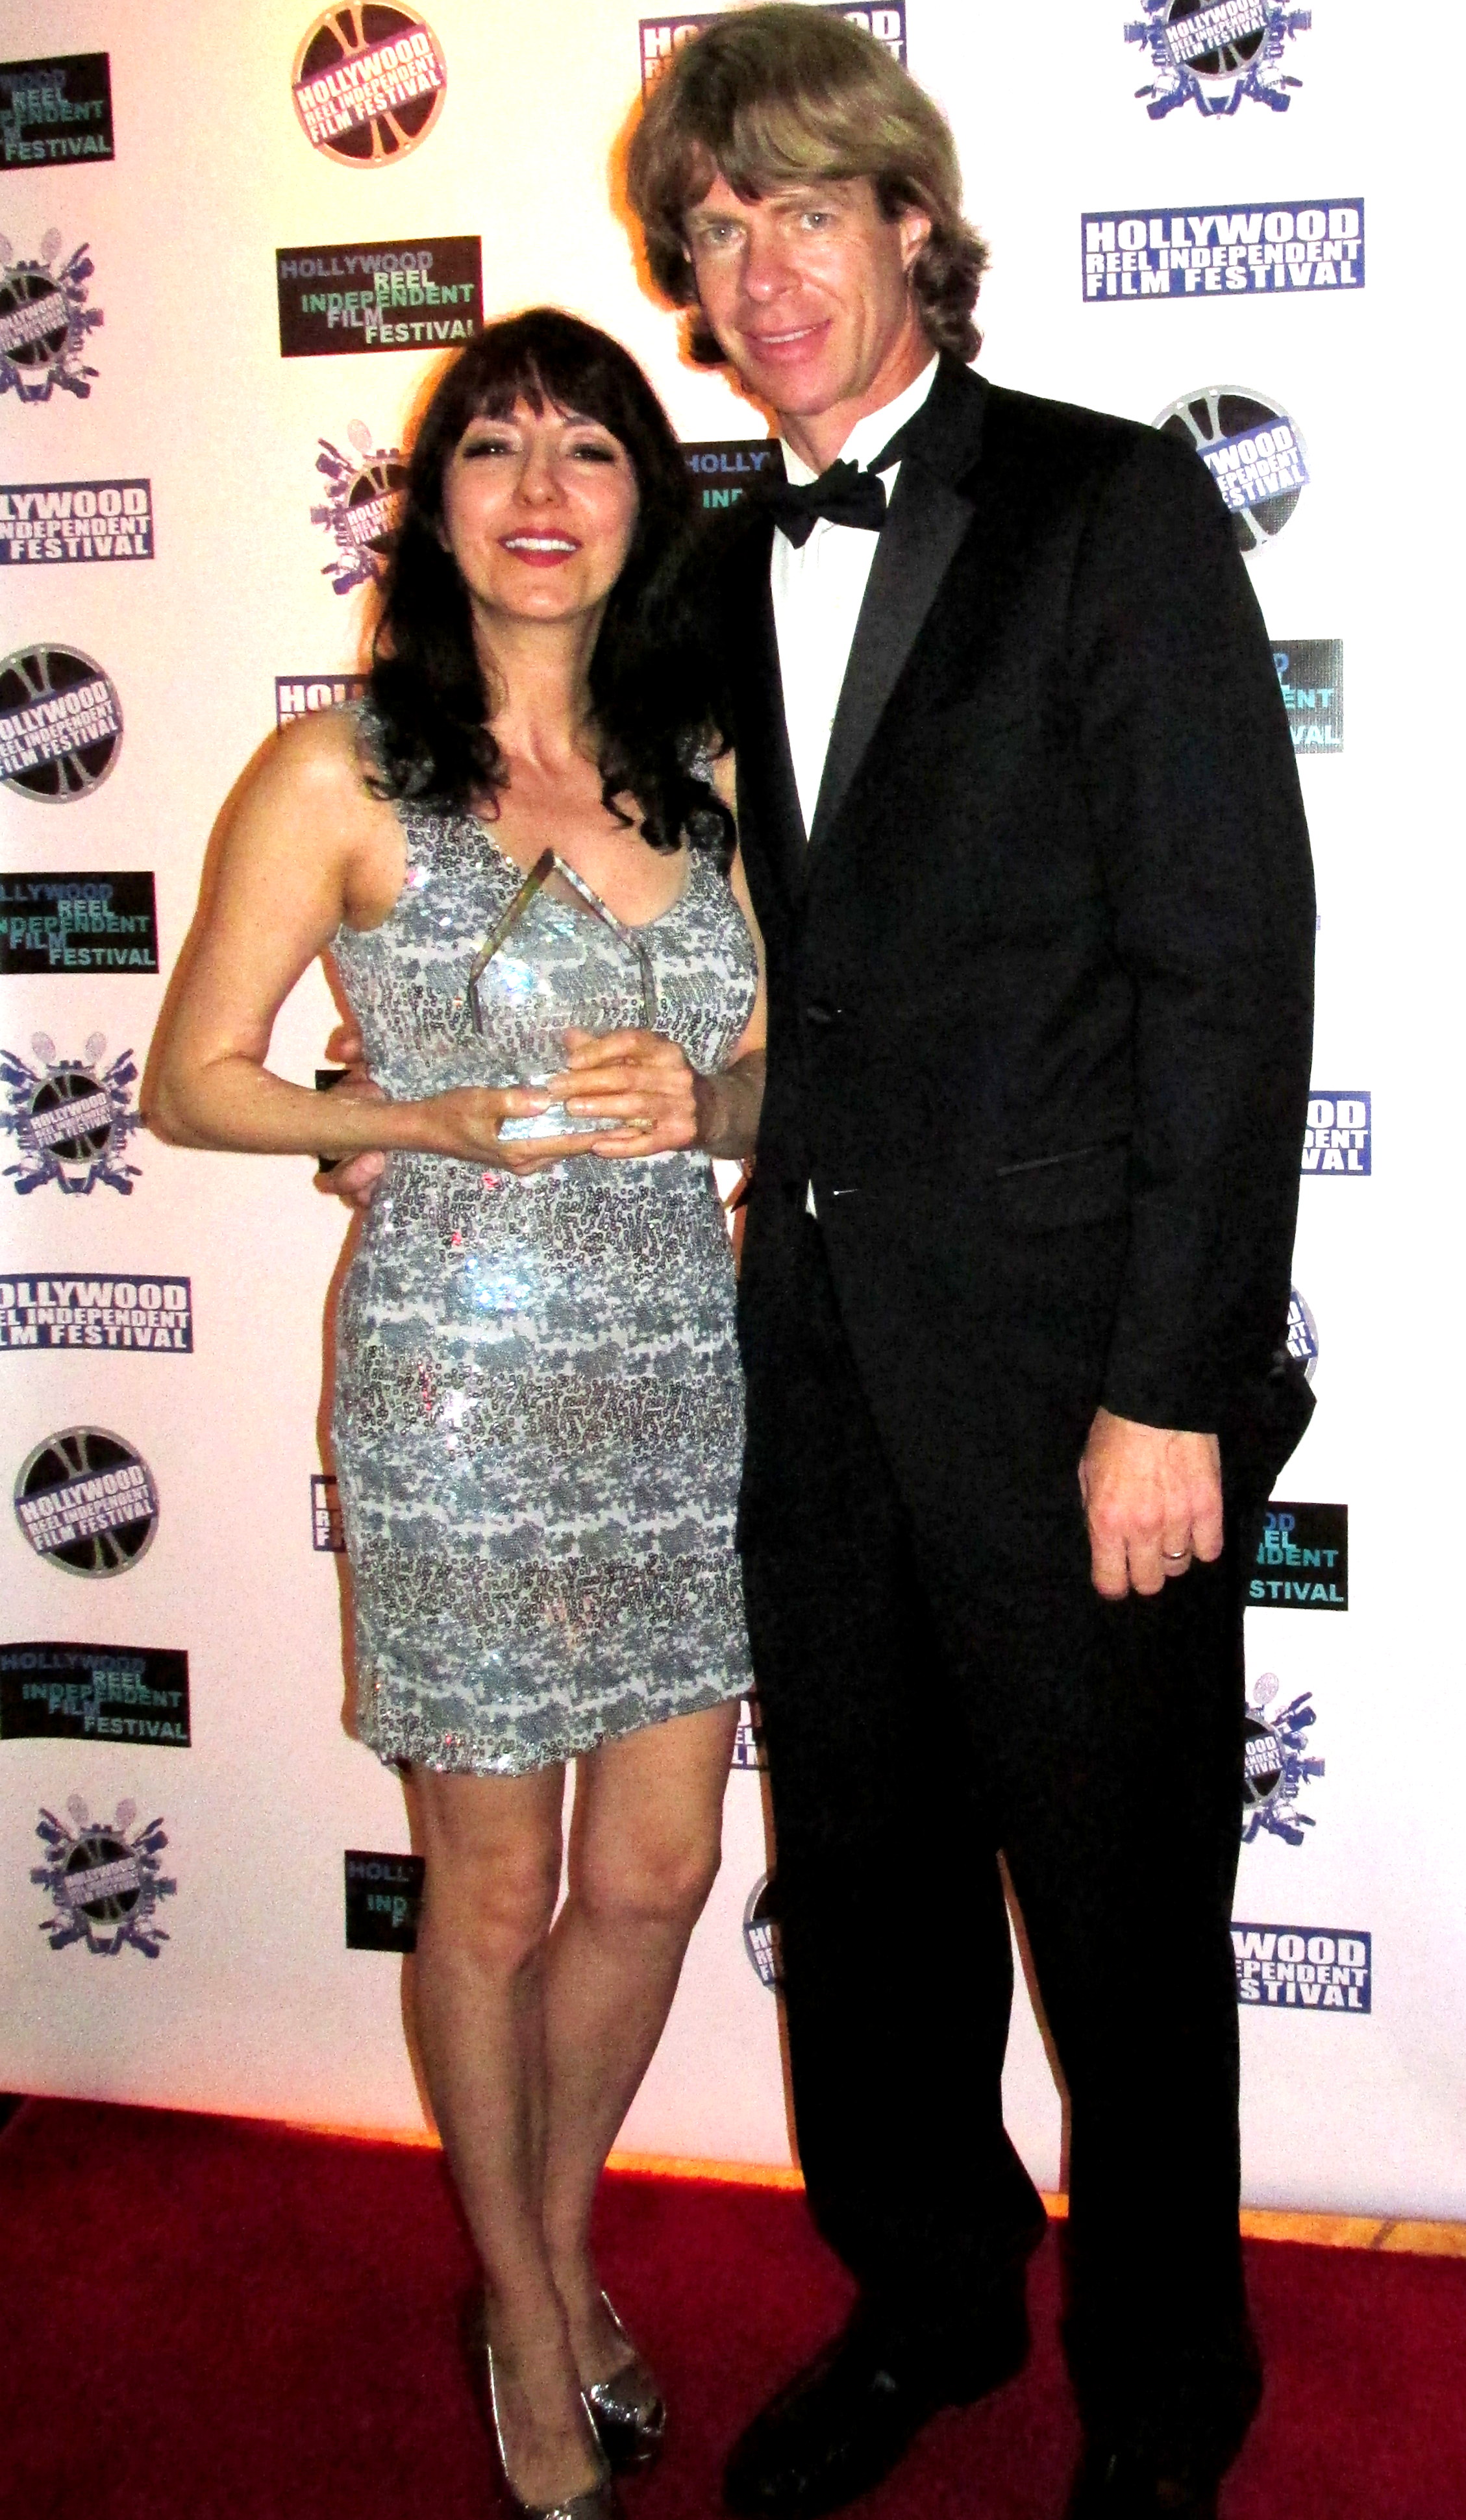 Luciana Lagana (lead and co-producer of Best Experimental Short) and actor husband Gregory Graham at event of the 2012 Hollywood Reel Independent Film Festival